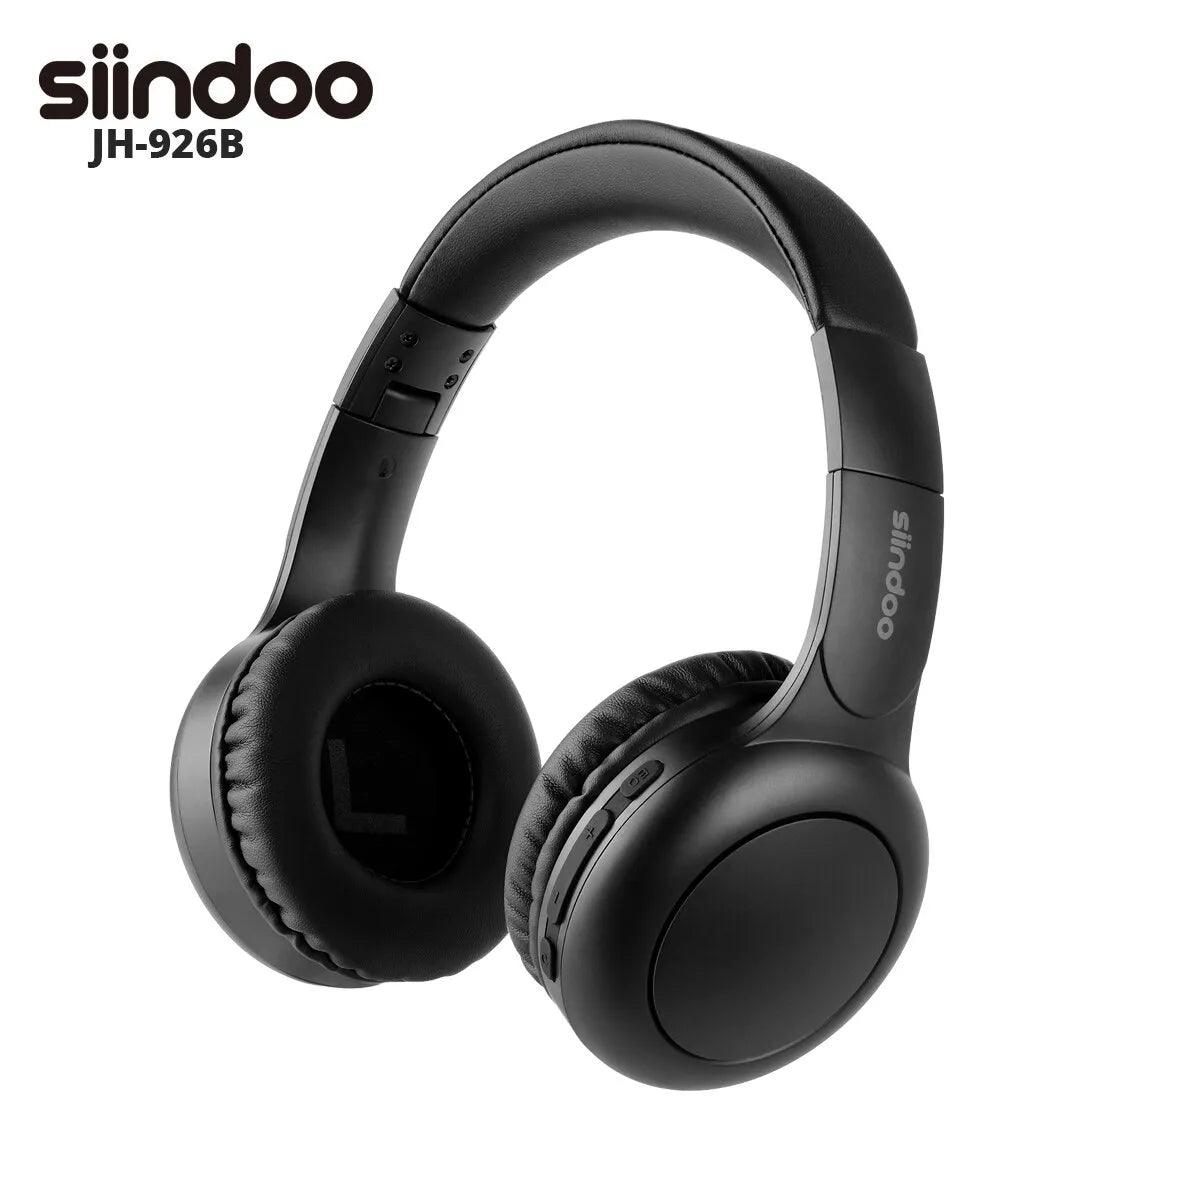 Siindoo JH-926B Bluetooth Over-Ear Headphones with 3 EQ Modes: Lightweight Foldable Headset for Kids and Teens  ourlum.com   